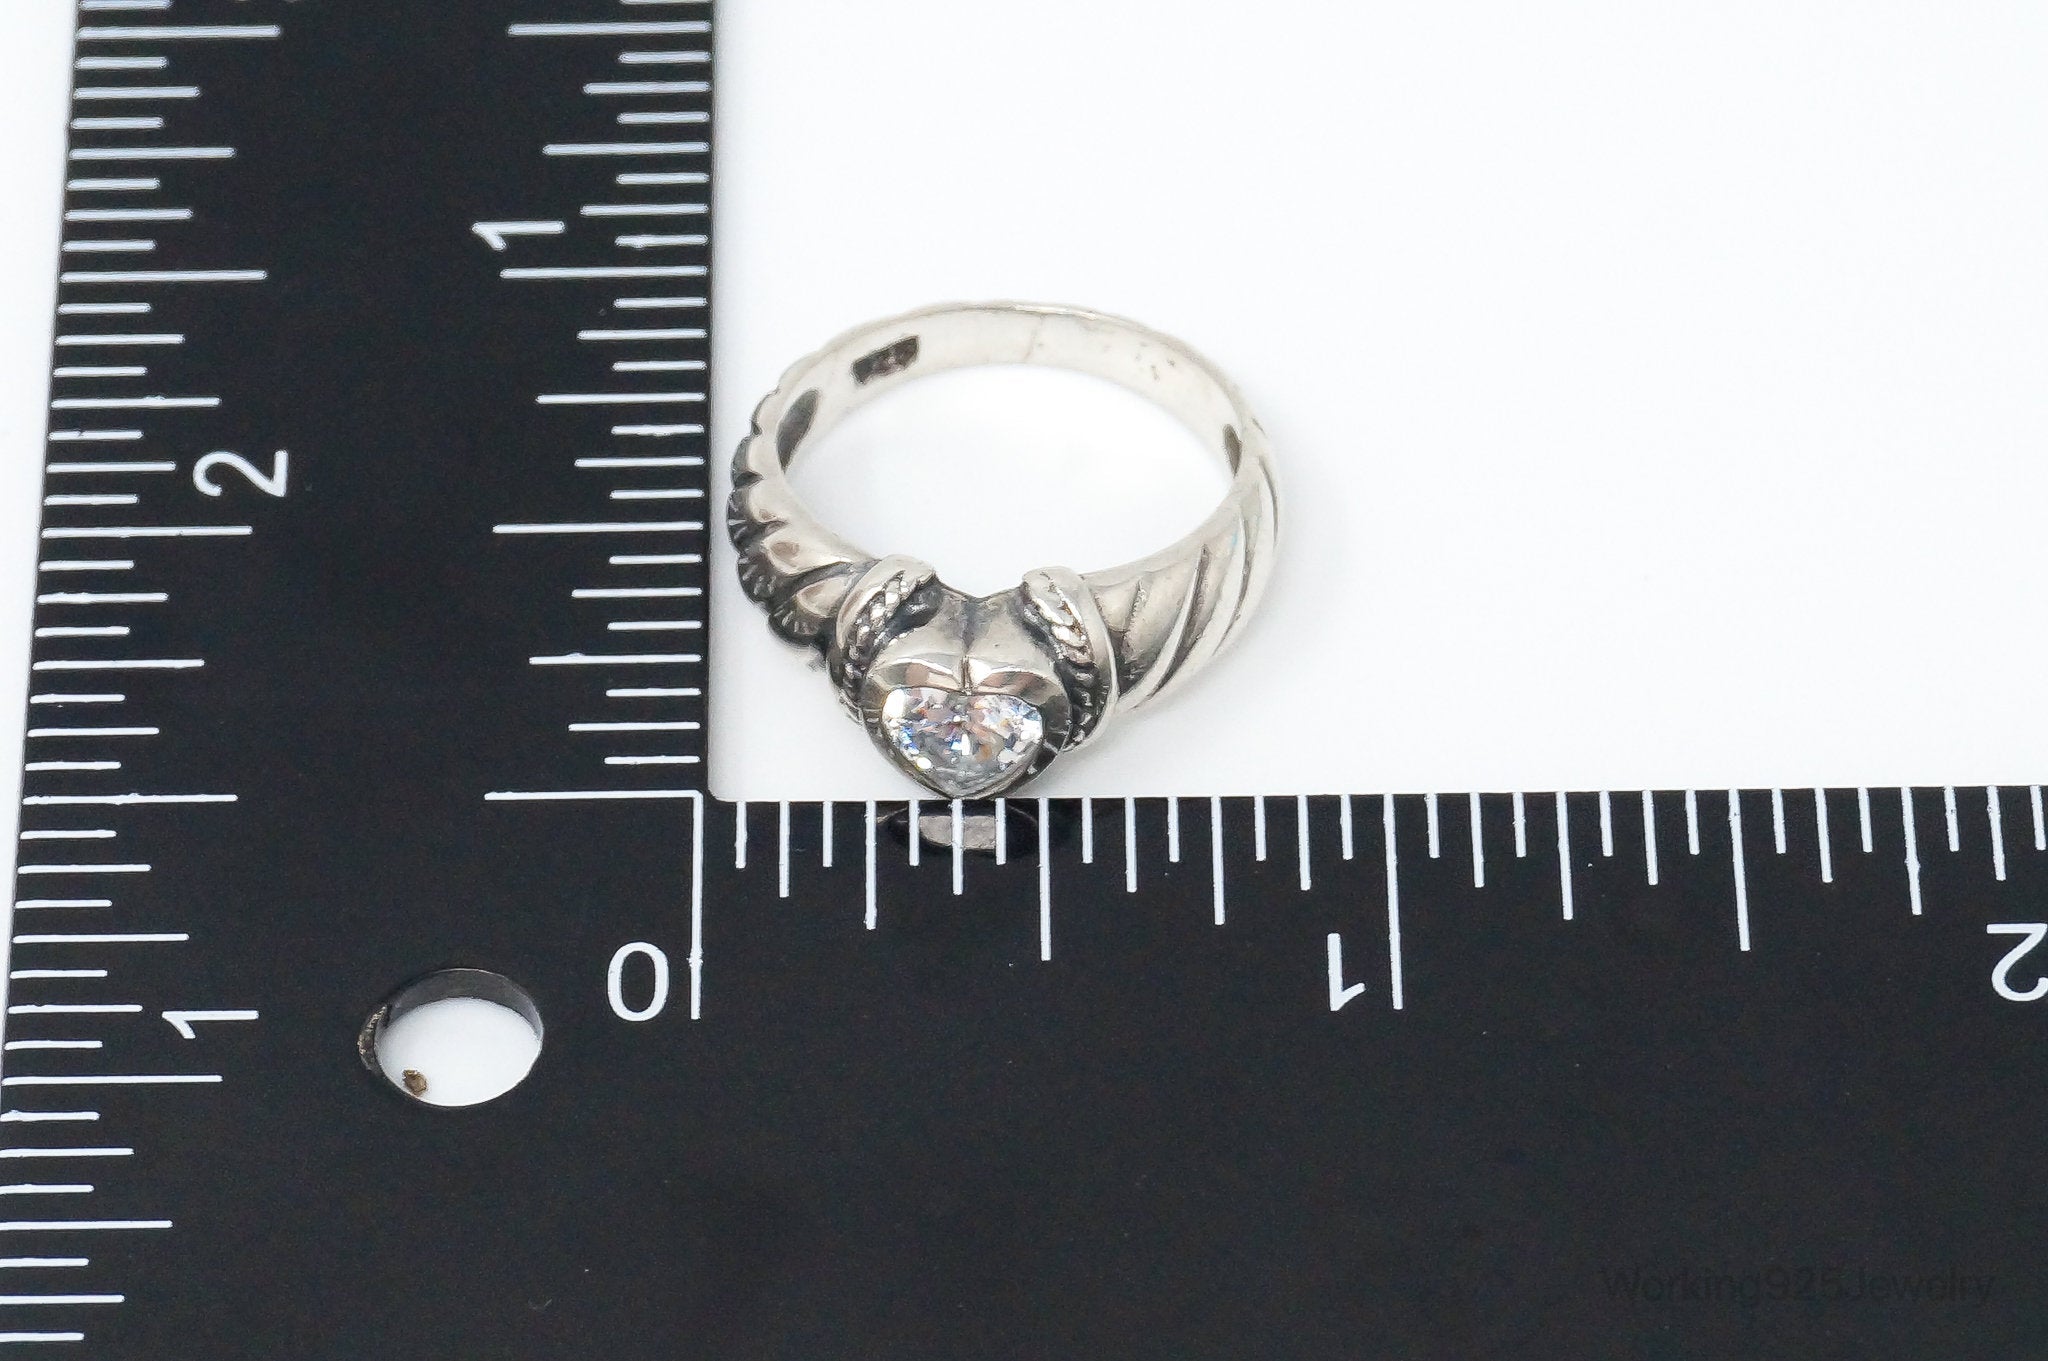 Vintage Cubic Zirconia Heart Sterling Silver Ring Size 7